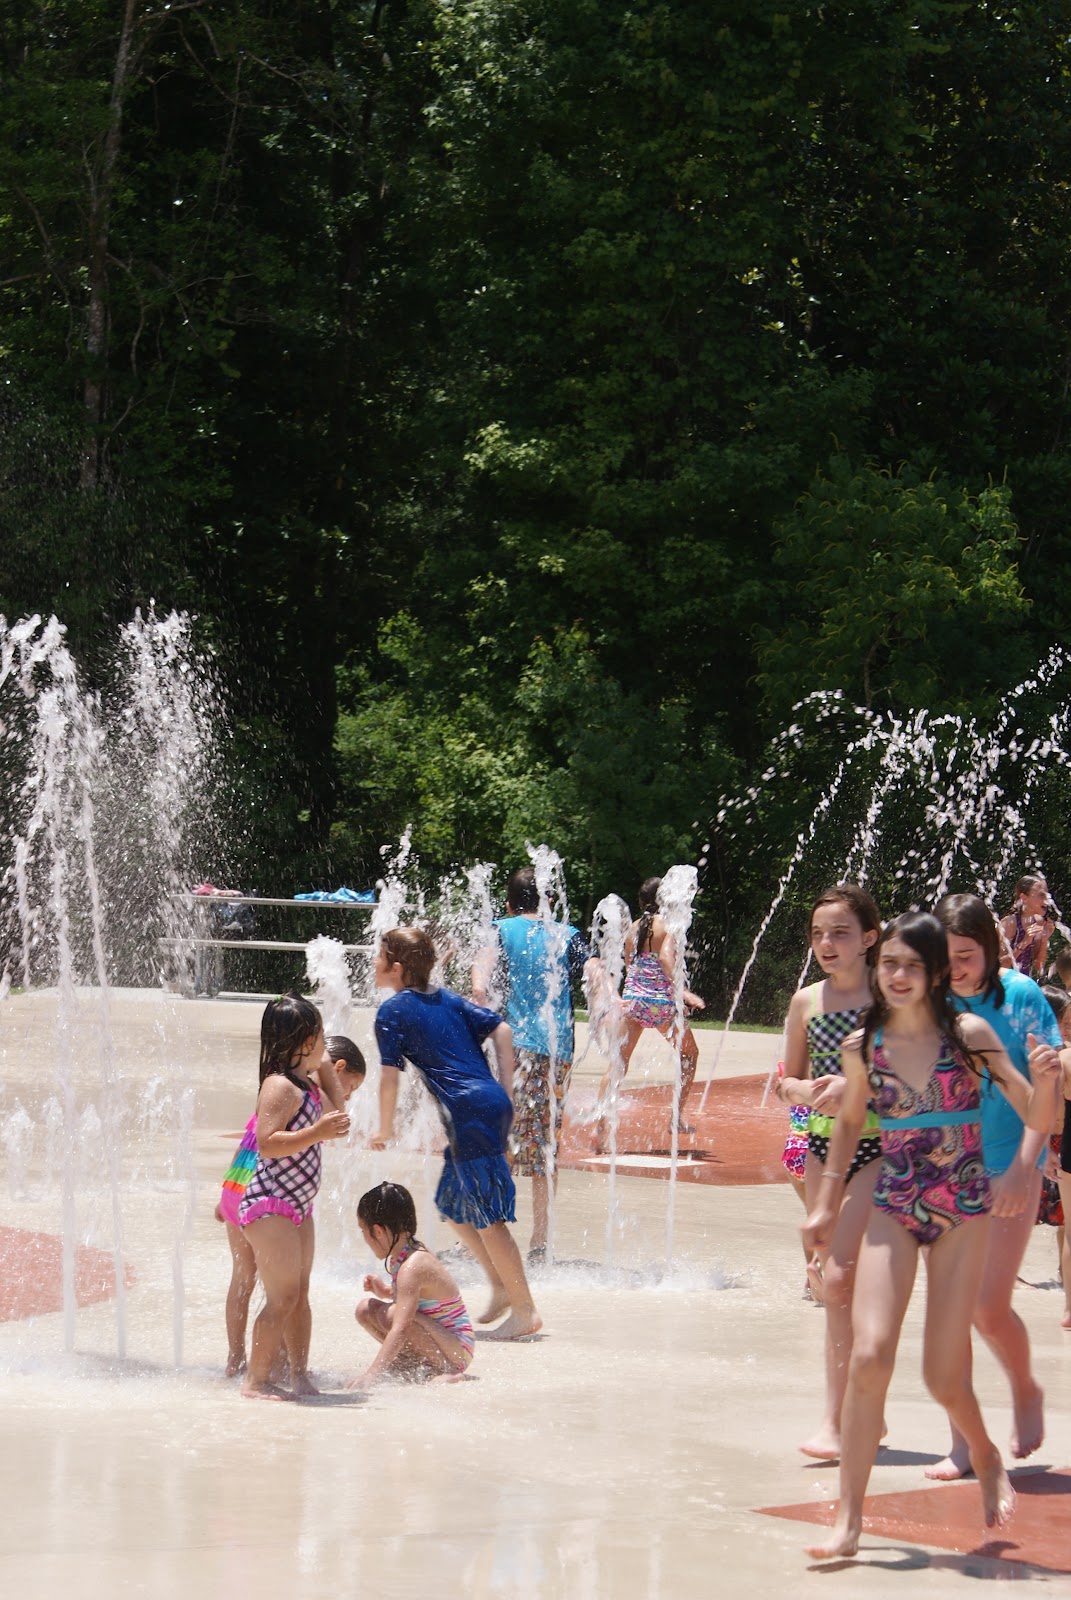 A Sweet Sun-Kissed Summer: Go to the Splash Pad (multiple times!!)